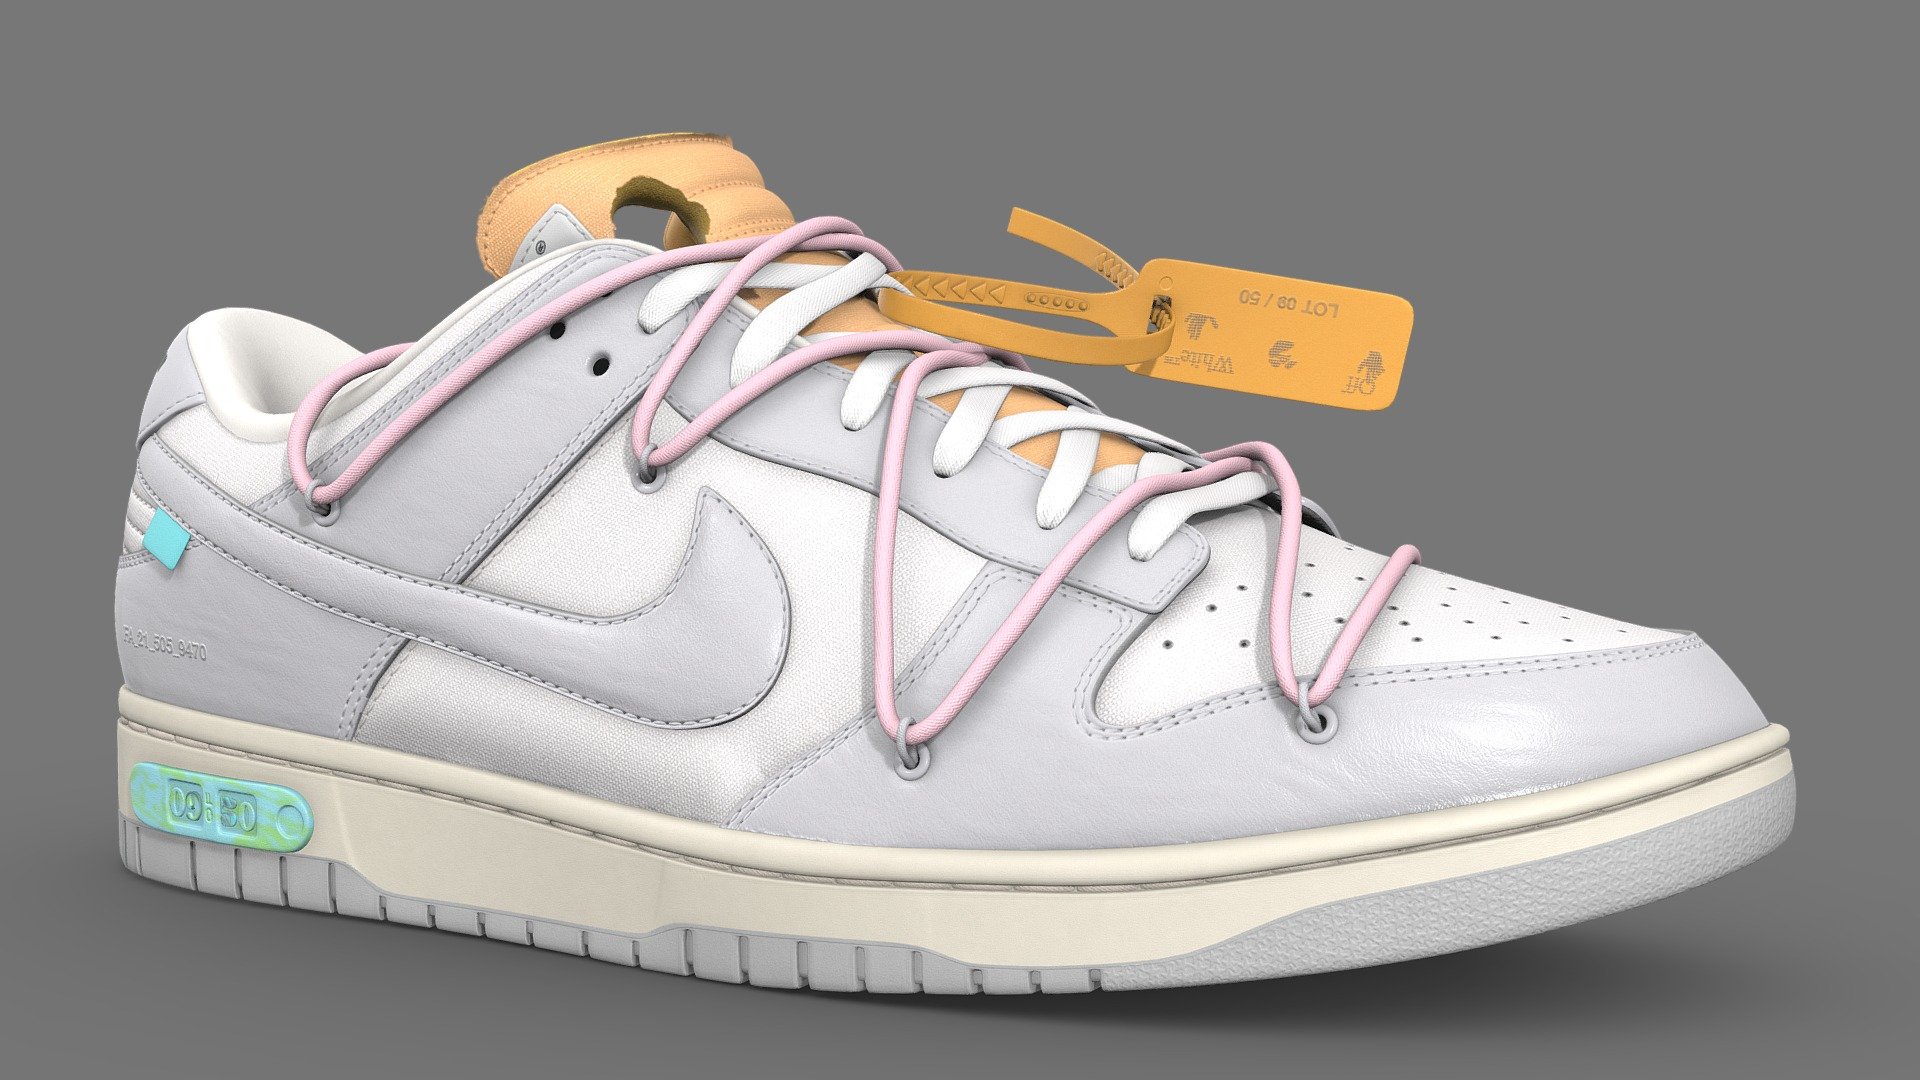 Off White collaboration with Nike on a Dunk Low, made in Blender, textured in Substance. Released in 2021. Colourful hits of orange and pink make this one of the most desirable shoe of the fifty

Every detail was made in the recreation of this shoe, from the text on the medial side of the shoe to the subtlety of each material, nothing went overlooked. Stitches were sculpted by hand to achieve the highest quality, and the frayed edge on the tongue of the shoe was created such that there would be no gap between the canvas fabric and foam

**What's included **  

Firstly, two versions of this model. The base version with 4 texture sets, and a One Mesh version that uses only 1 texture set. Both models are identical, only how they are unwrapped is different. There are two texture sets, with 4 maps, namely: Base Color, Metallic, Normal, and Roughness. I have included several other versions, such as High and Low Poly shoes All textures are 4096x4096. Meaning the One Mesh version has 4 2048x2048 textures 3d model